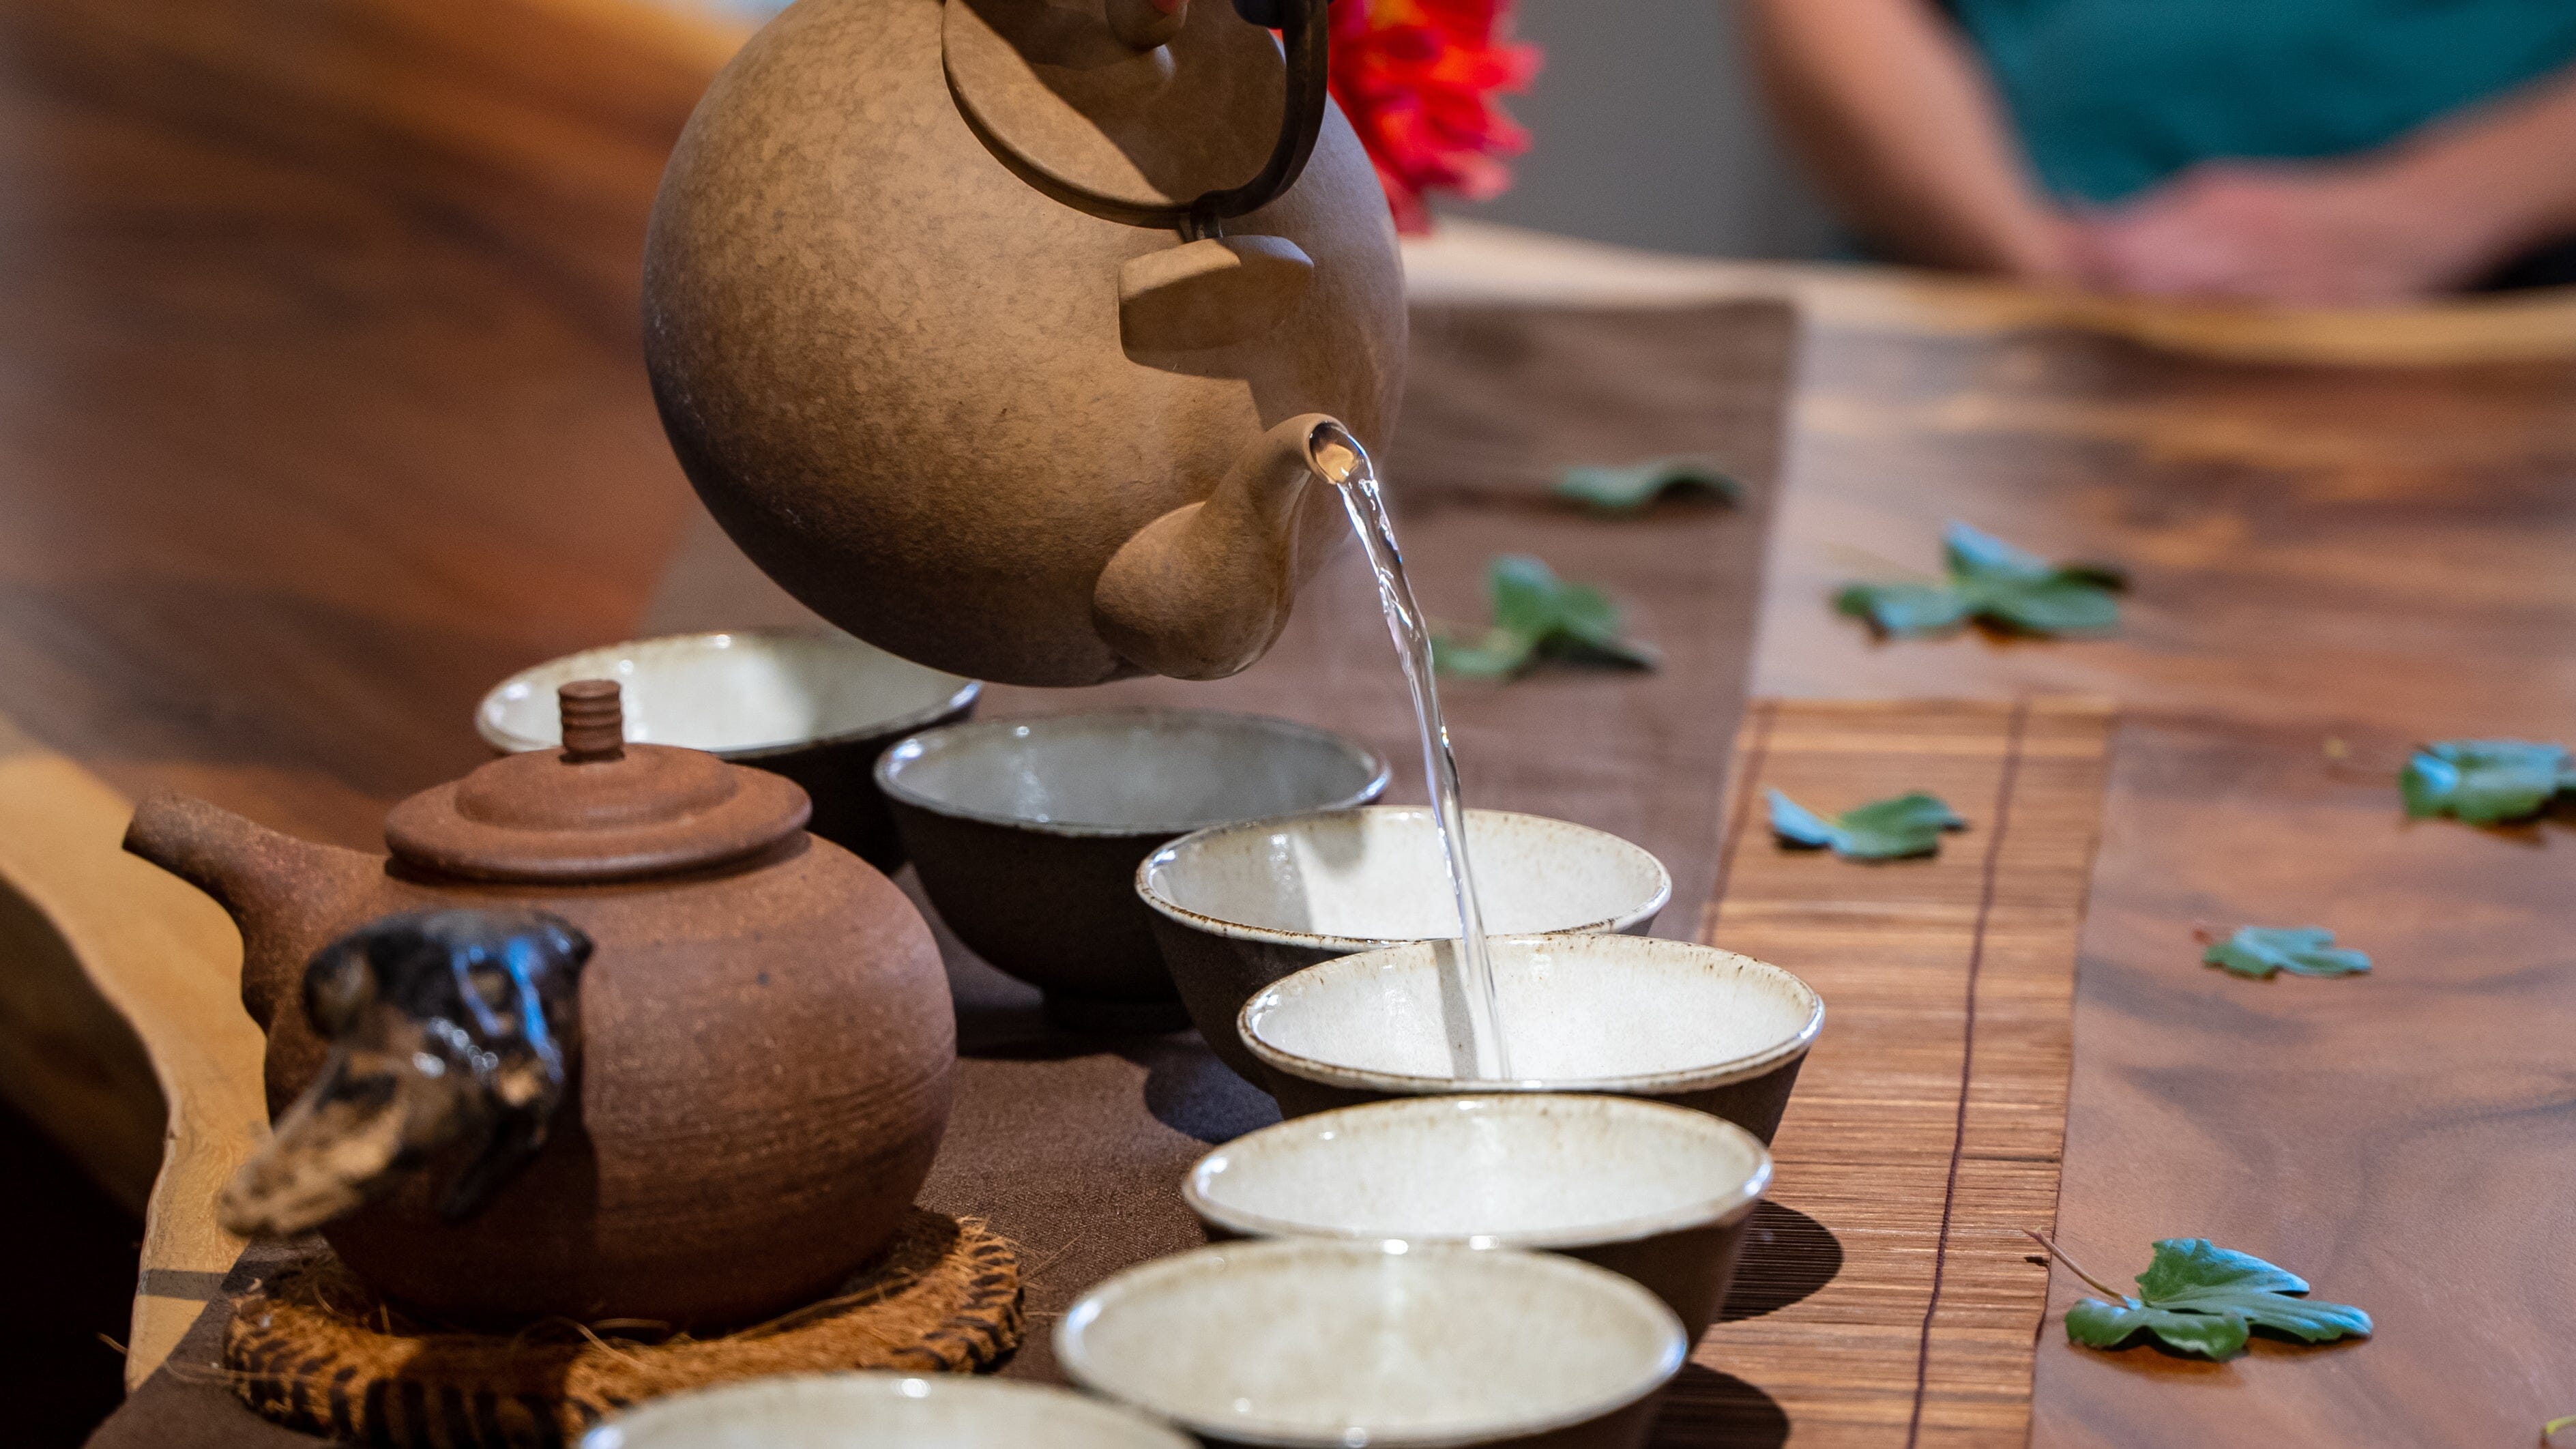 Some Essential Values of the Tea Ceremony